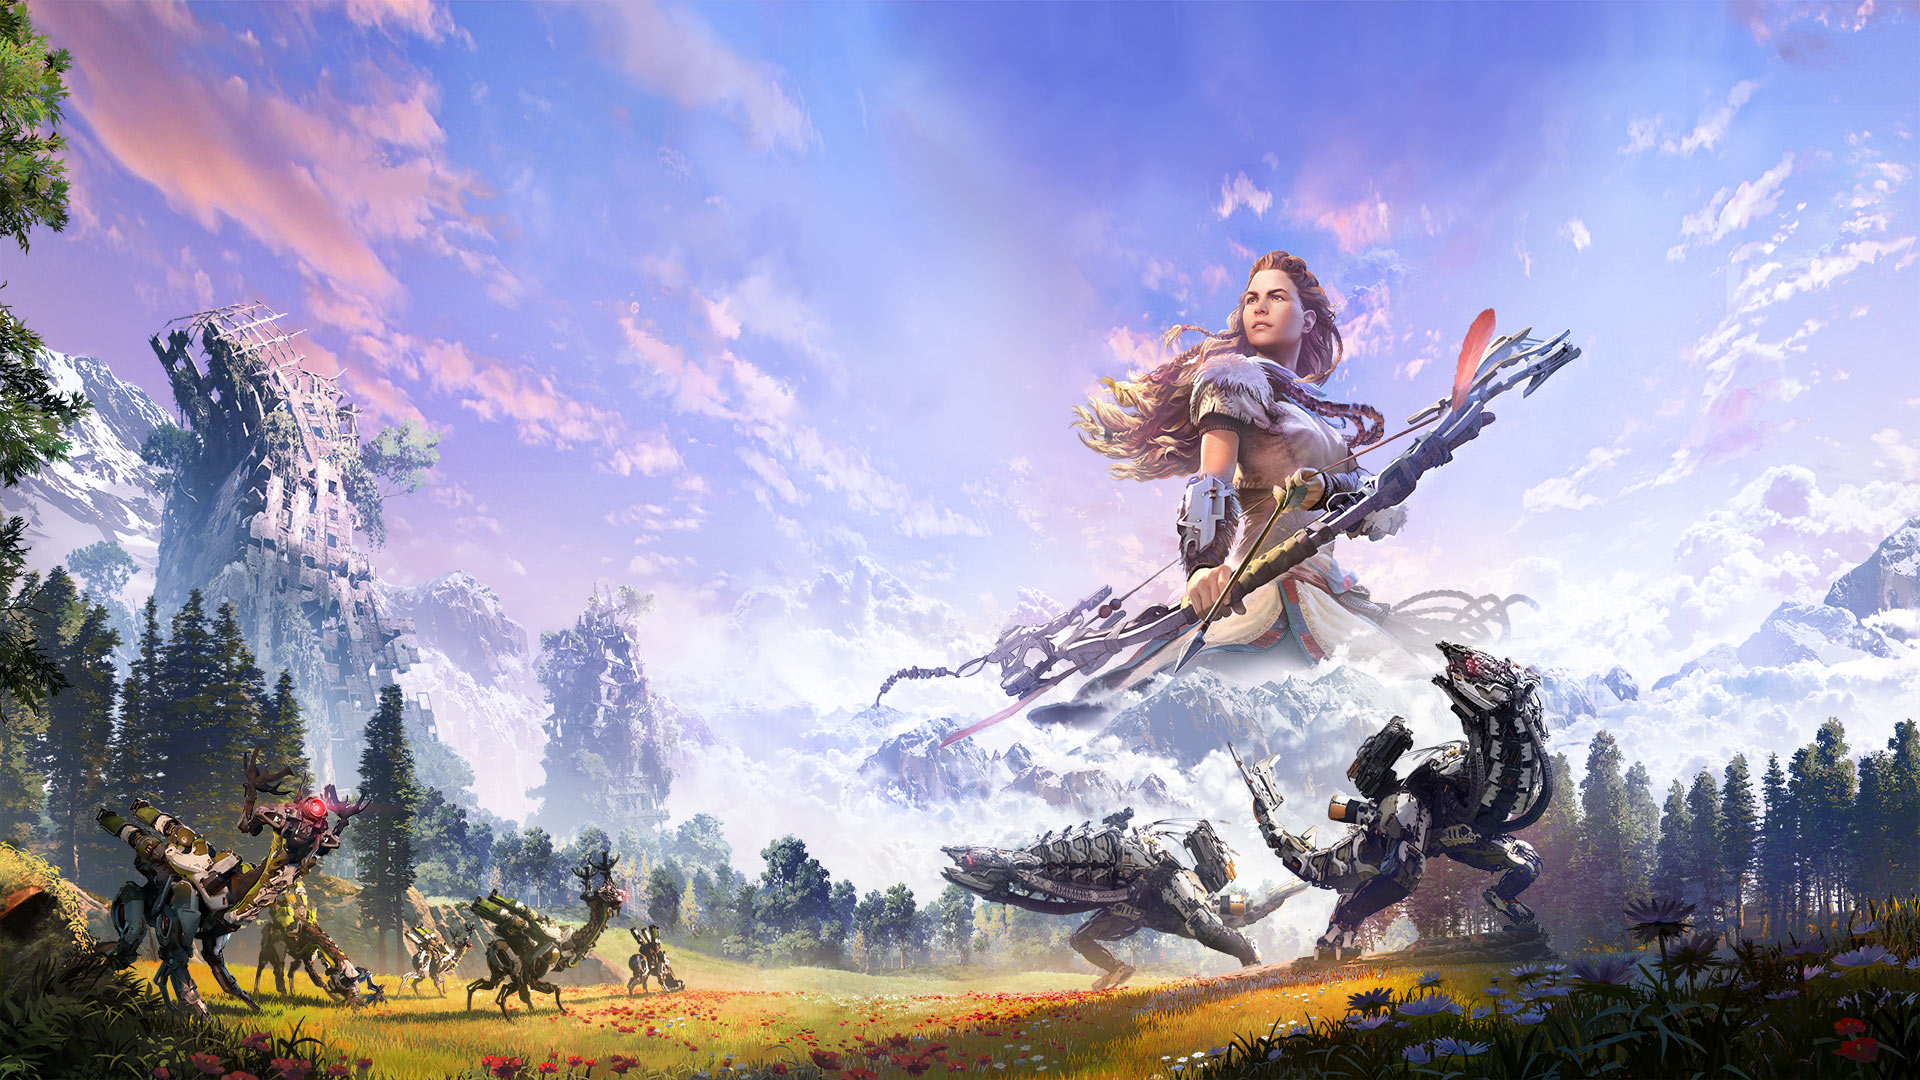 Horizon Zero Dawn is getting another patch on PC